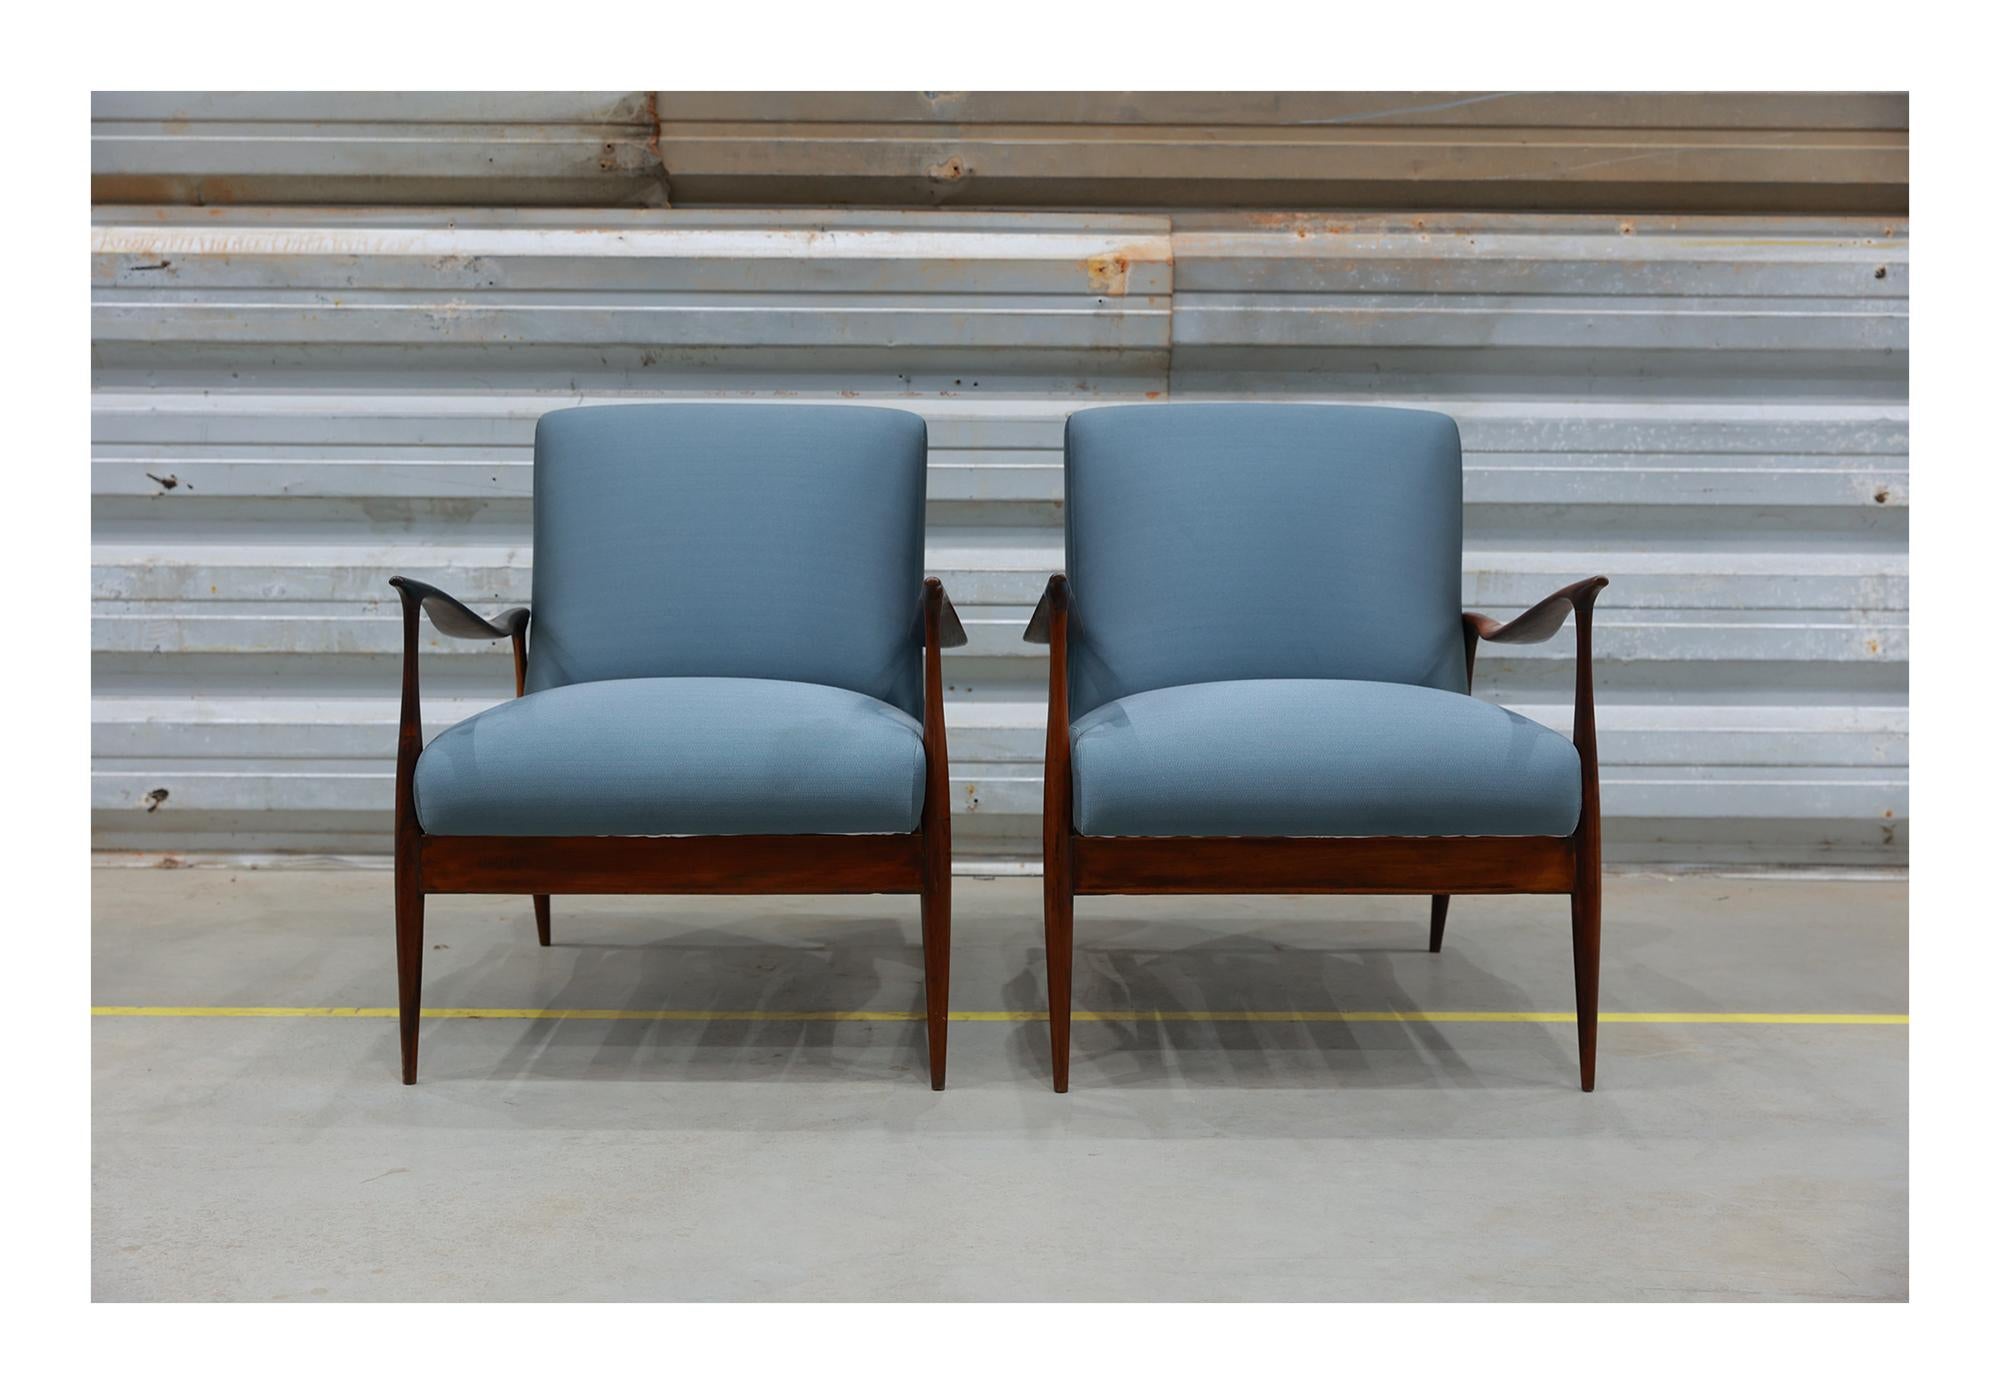 Hand-Painted Brazilian Modern Armchairs in Hardwood and Blue Fabric, Giuseppe Scapinelli